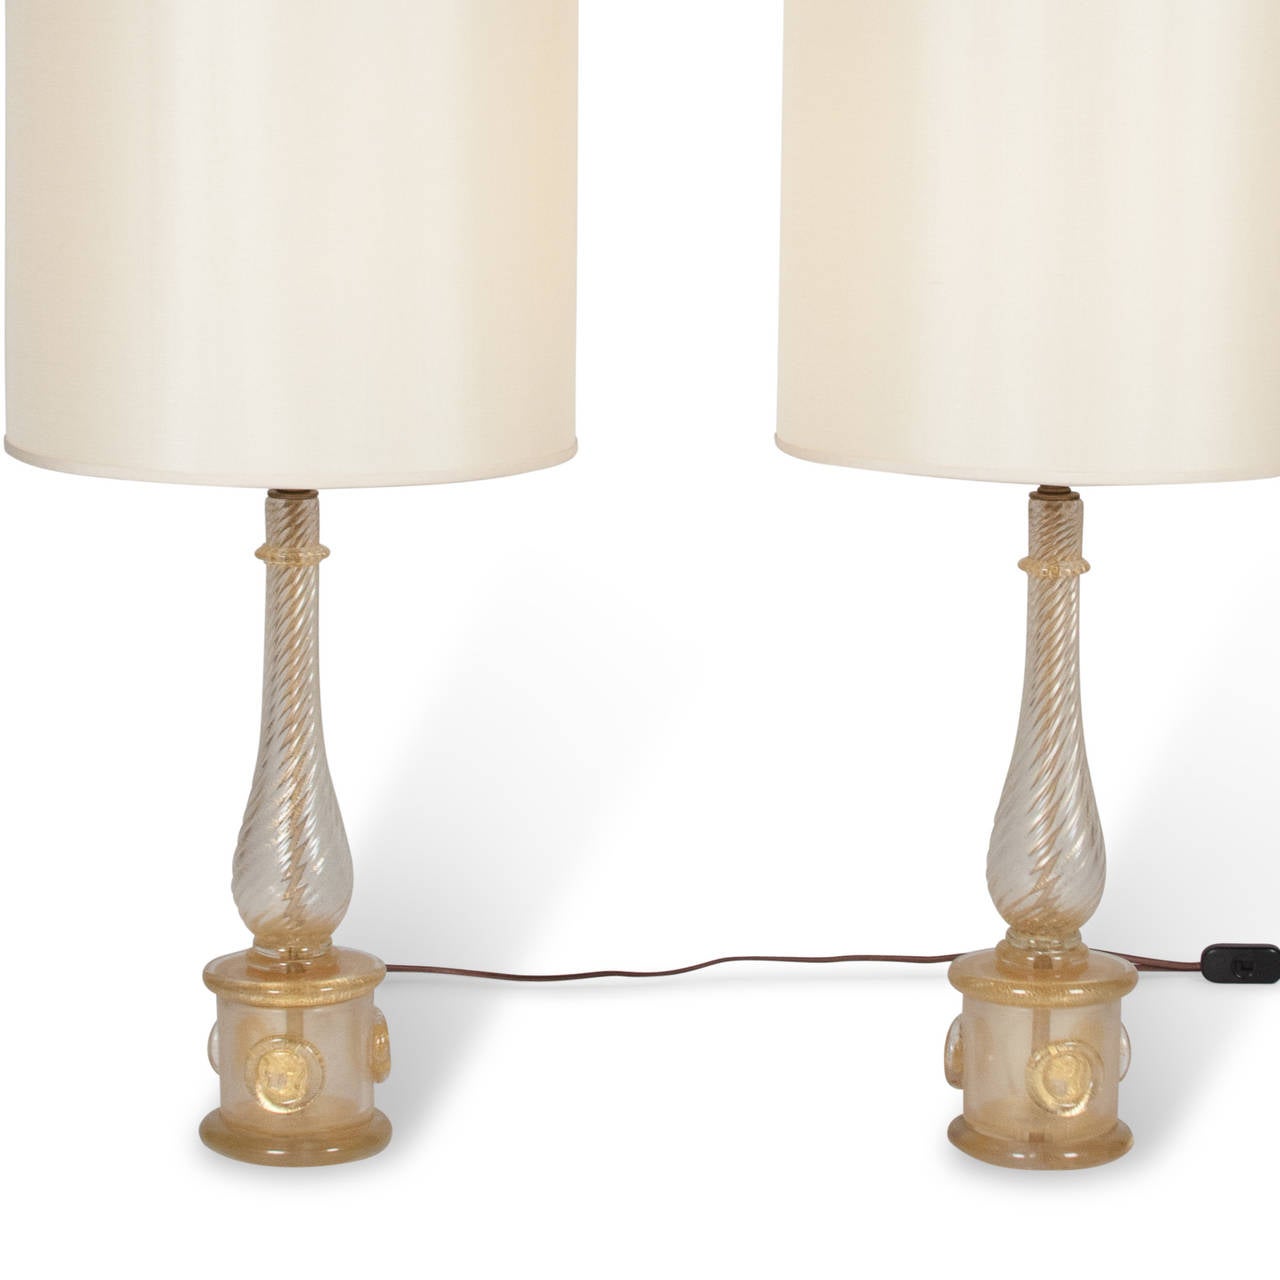 Mid-20th Century Pair of Gold Glass Lamps by Barovier e Toso, Italian, 1940s For Sale